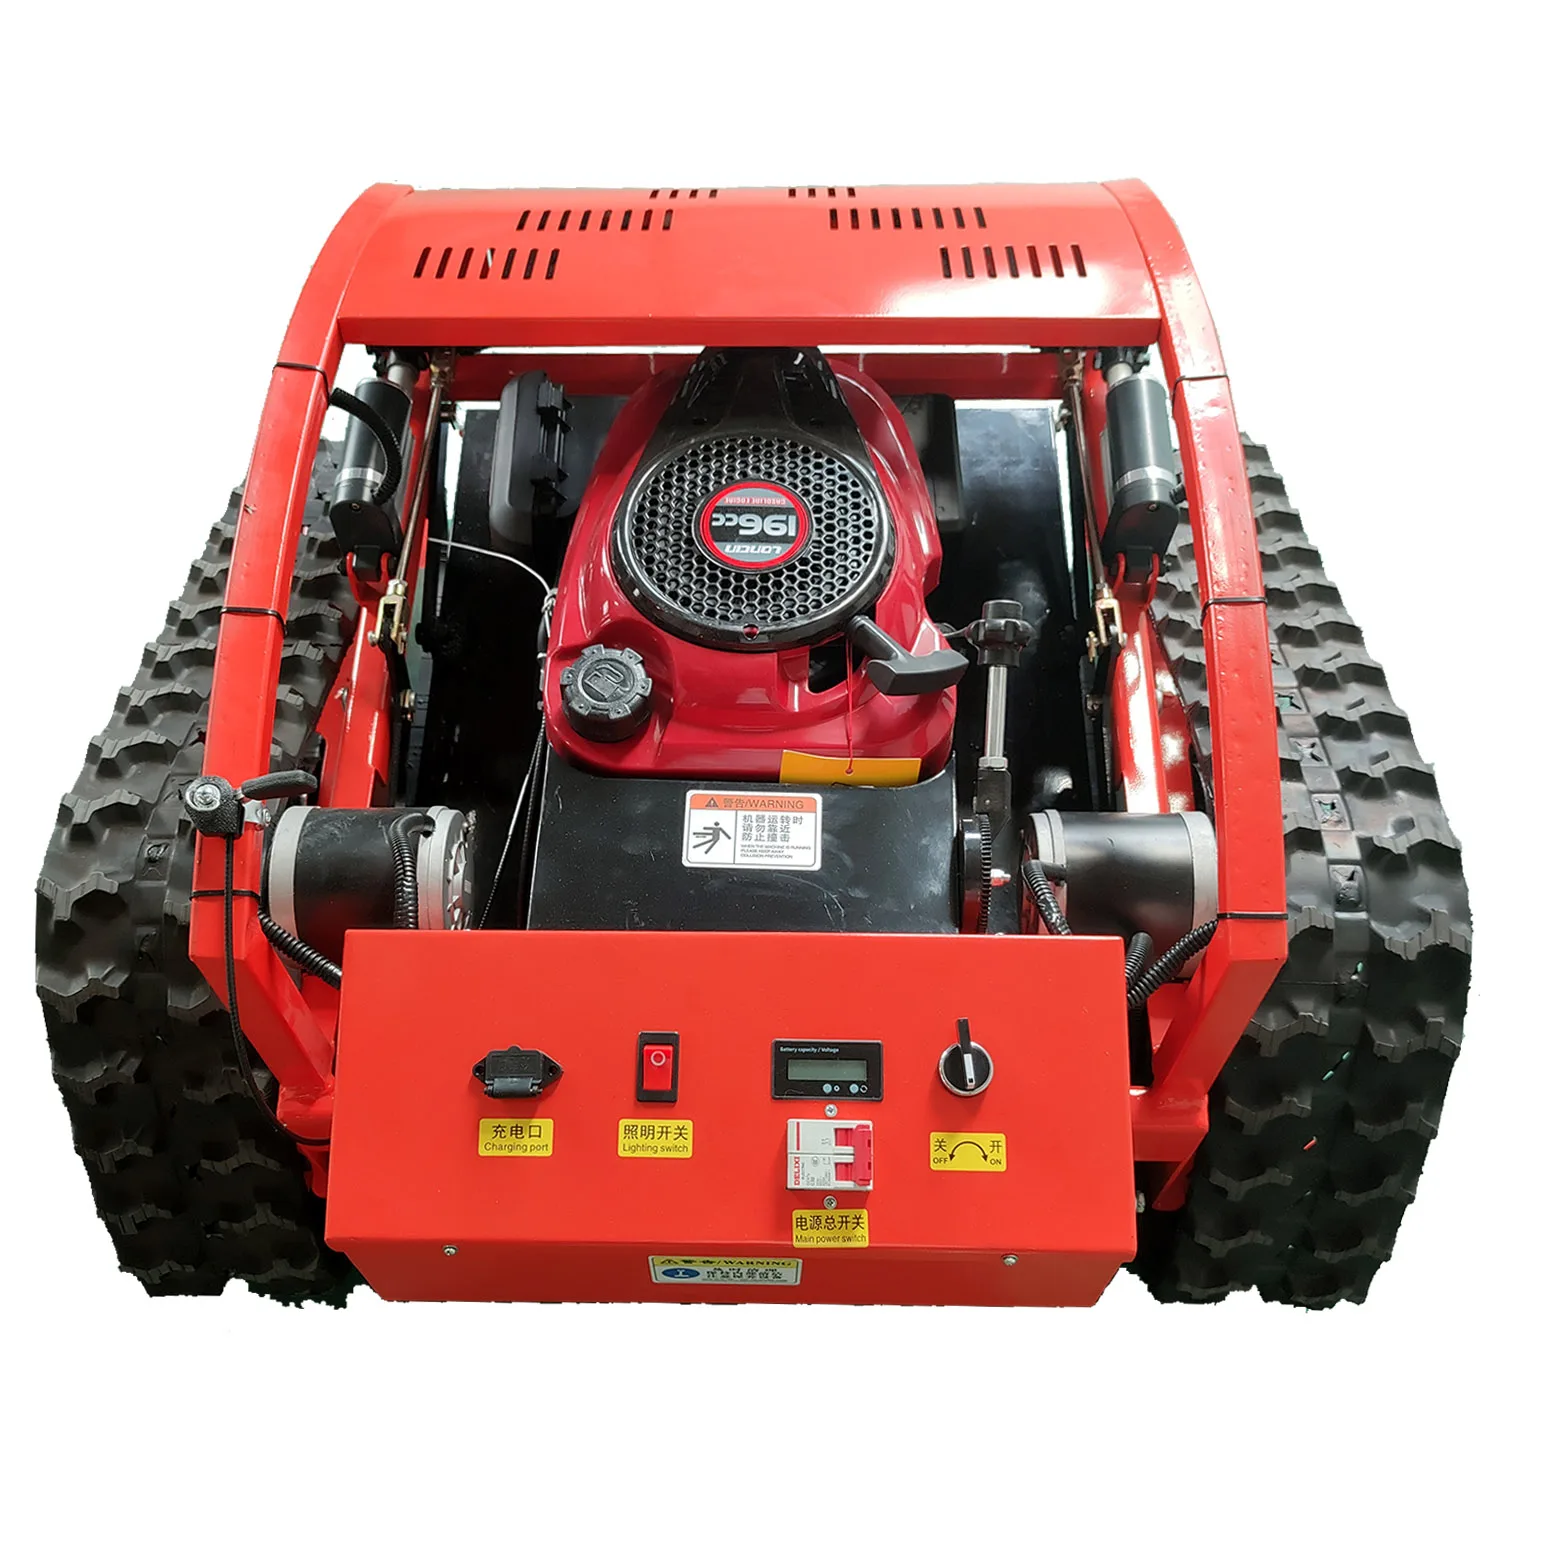 CNL-750 Crawler Self-propelled Lawn Mower Remote Controlled Lawn Mower enlarge